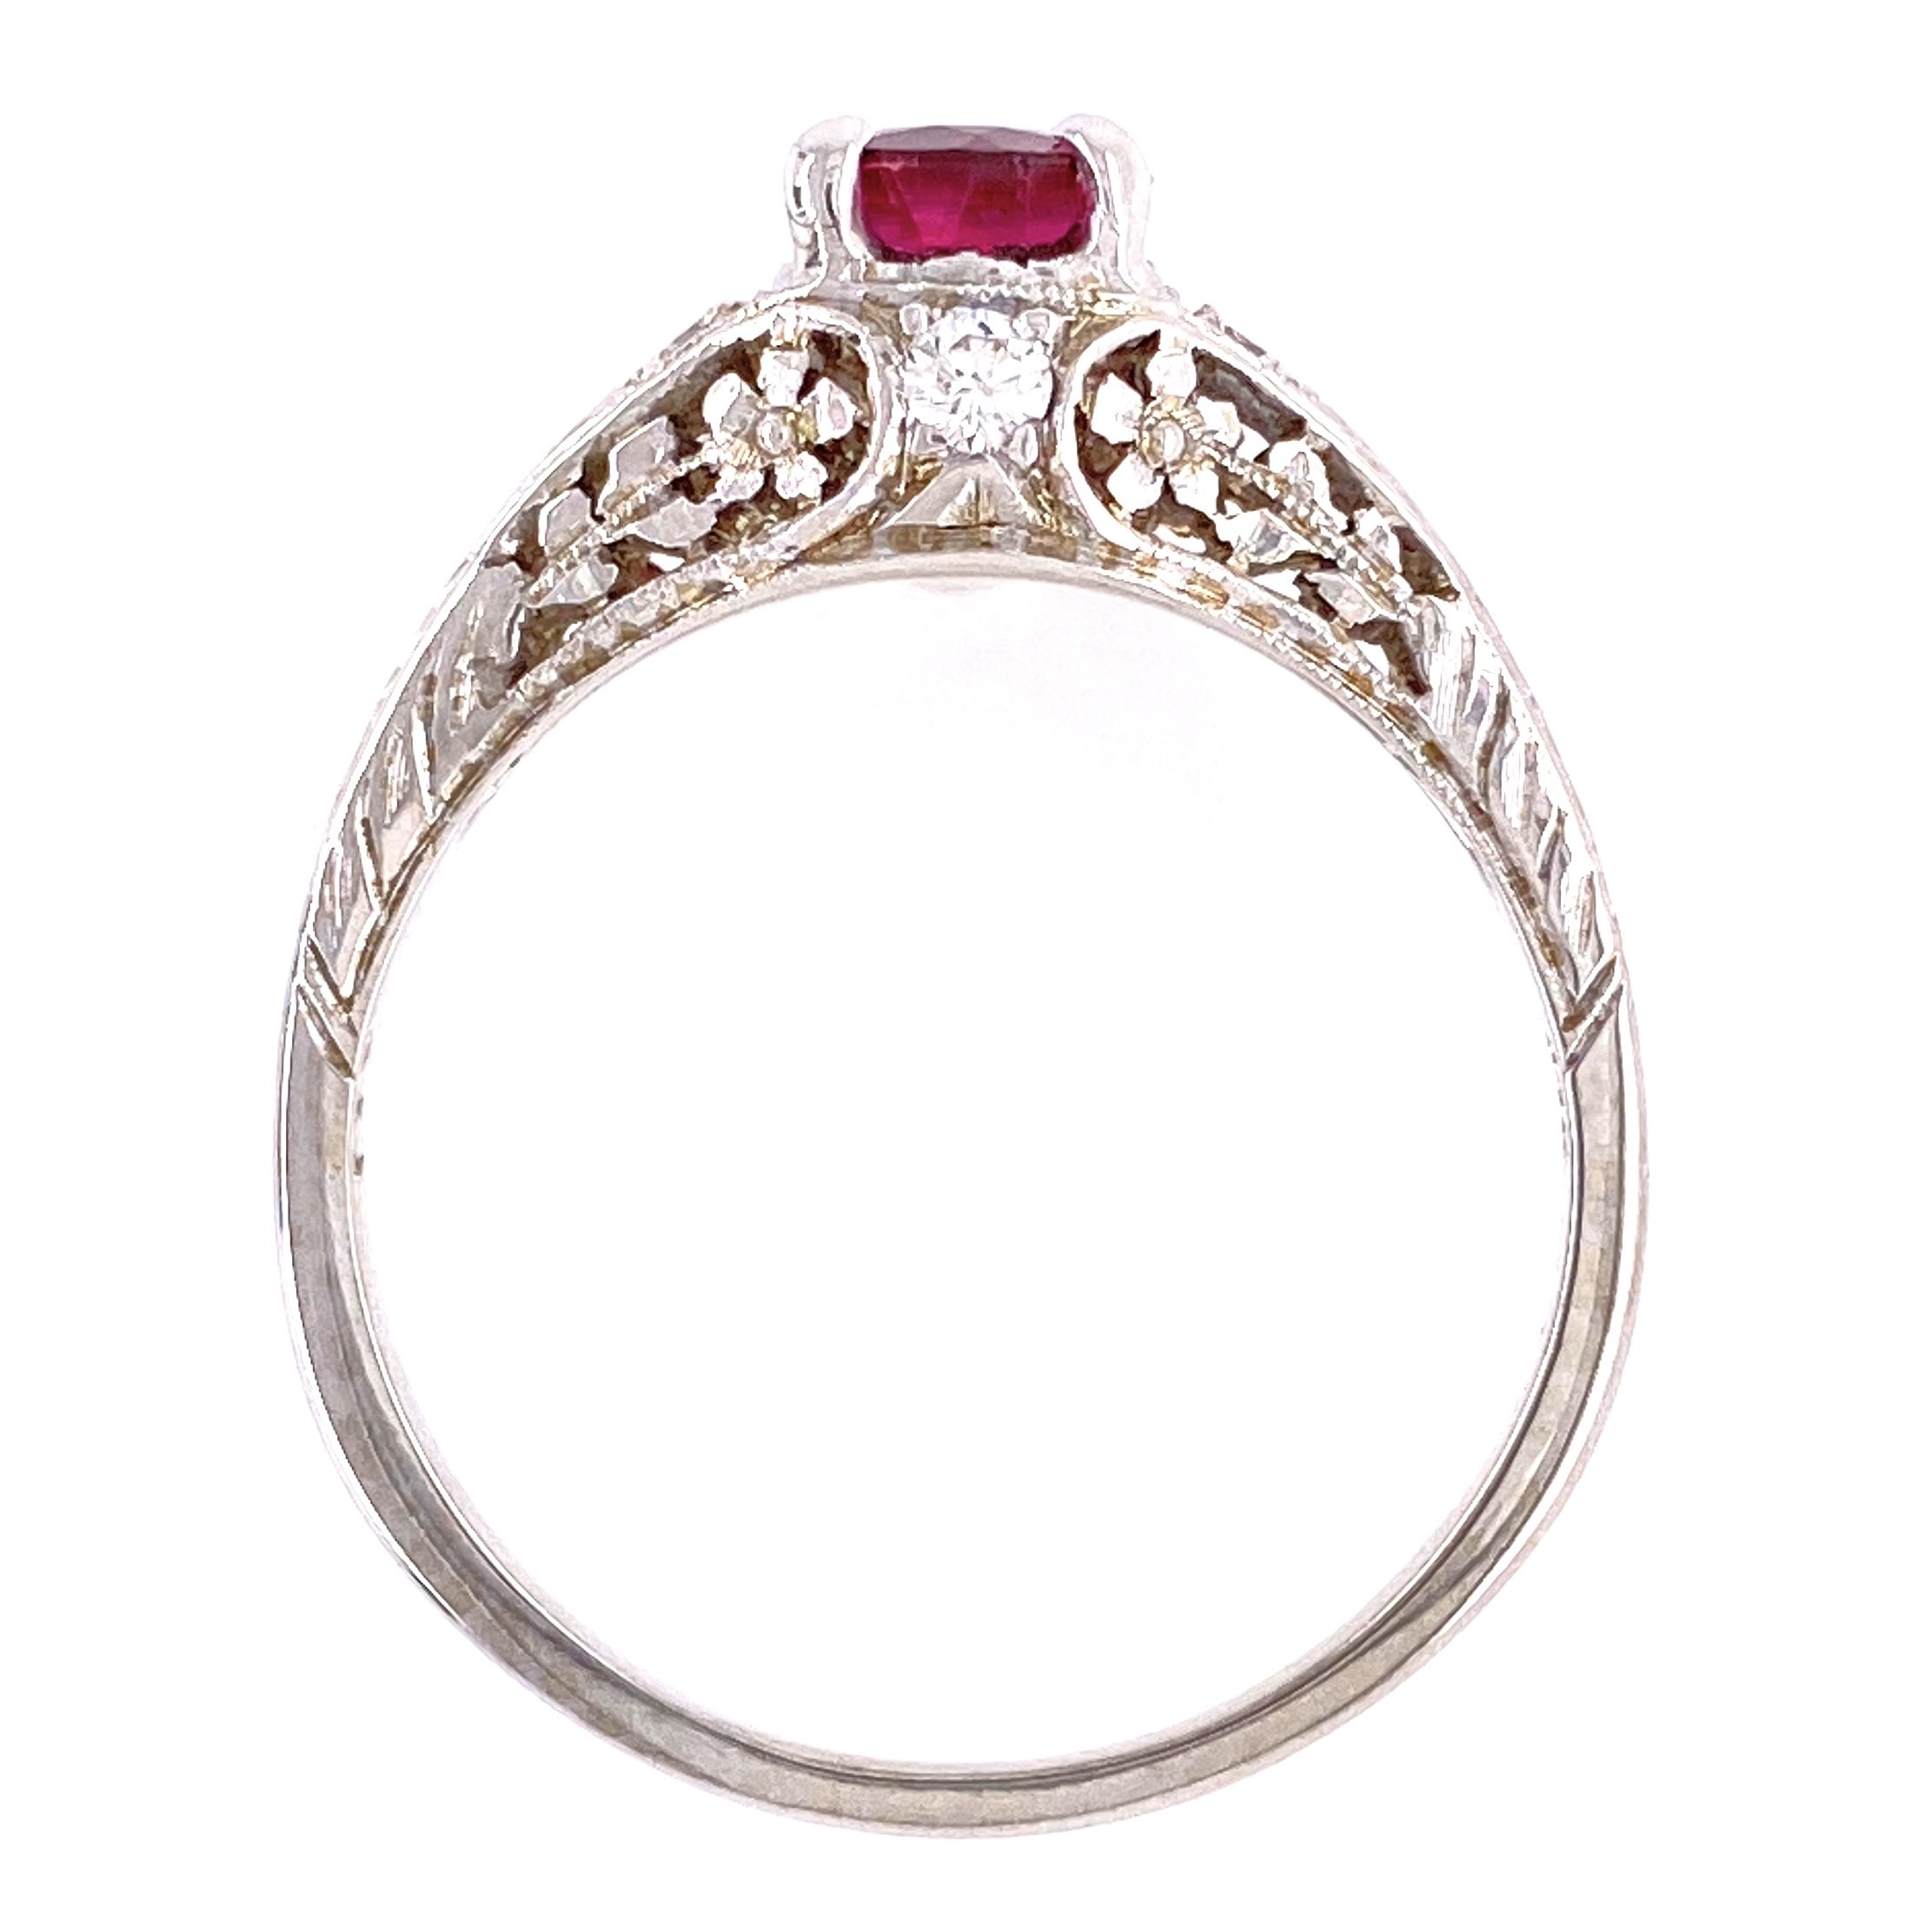 14K White Gold .97ct Red Spinel & .20tcw Diamond Engraved Ring 3.3g, s8.5